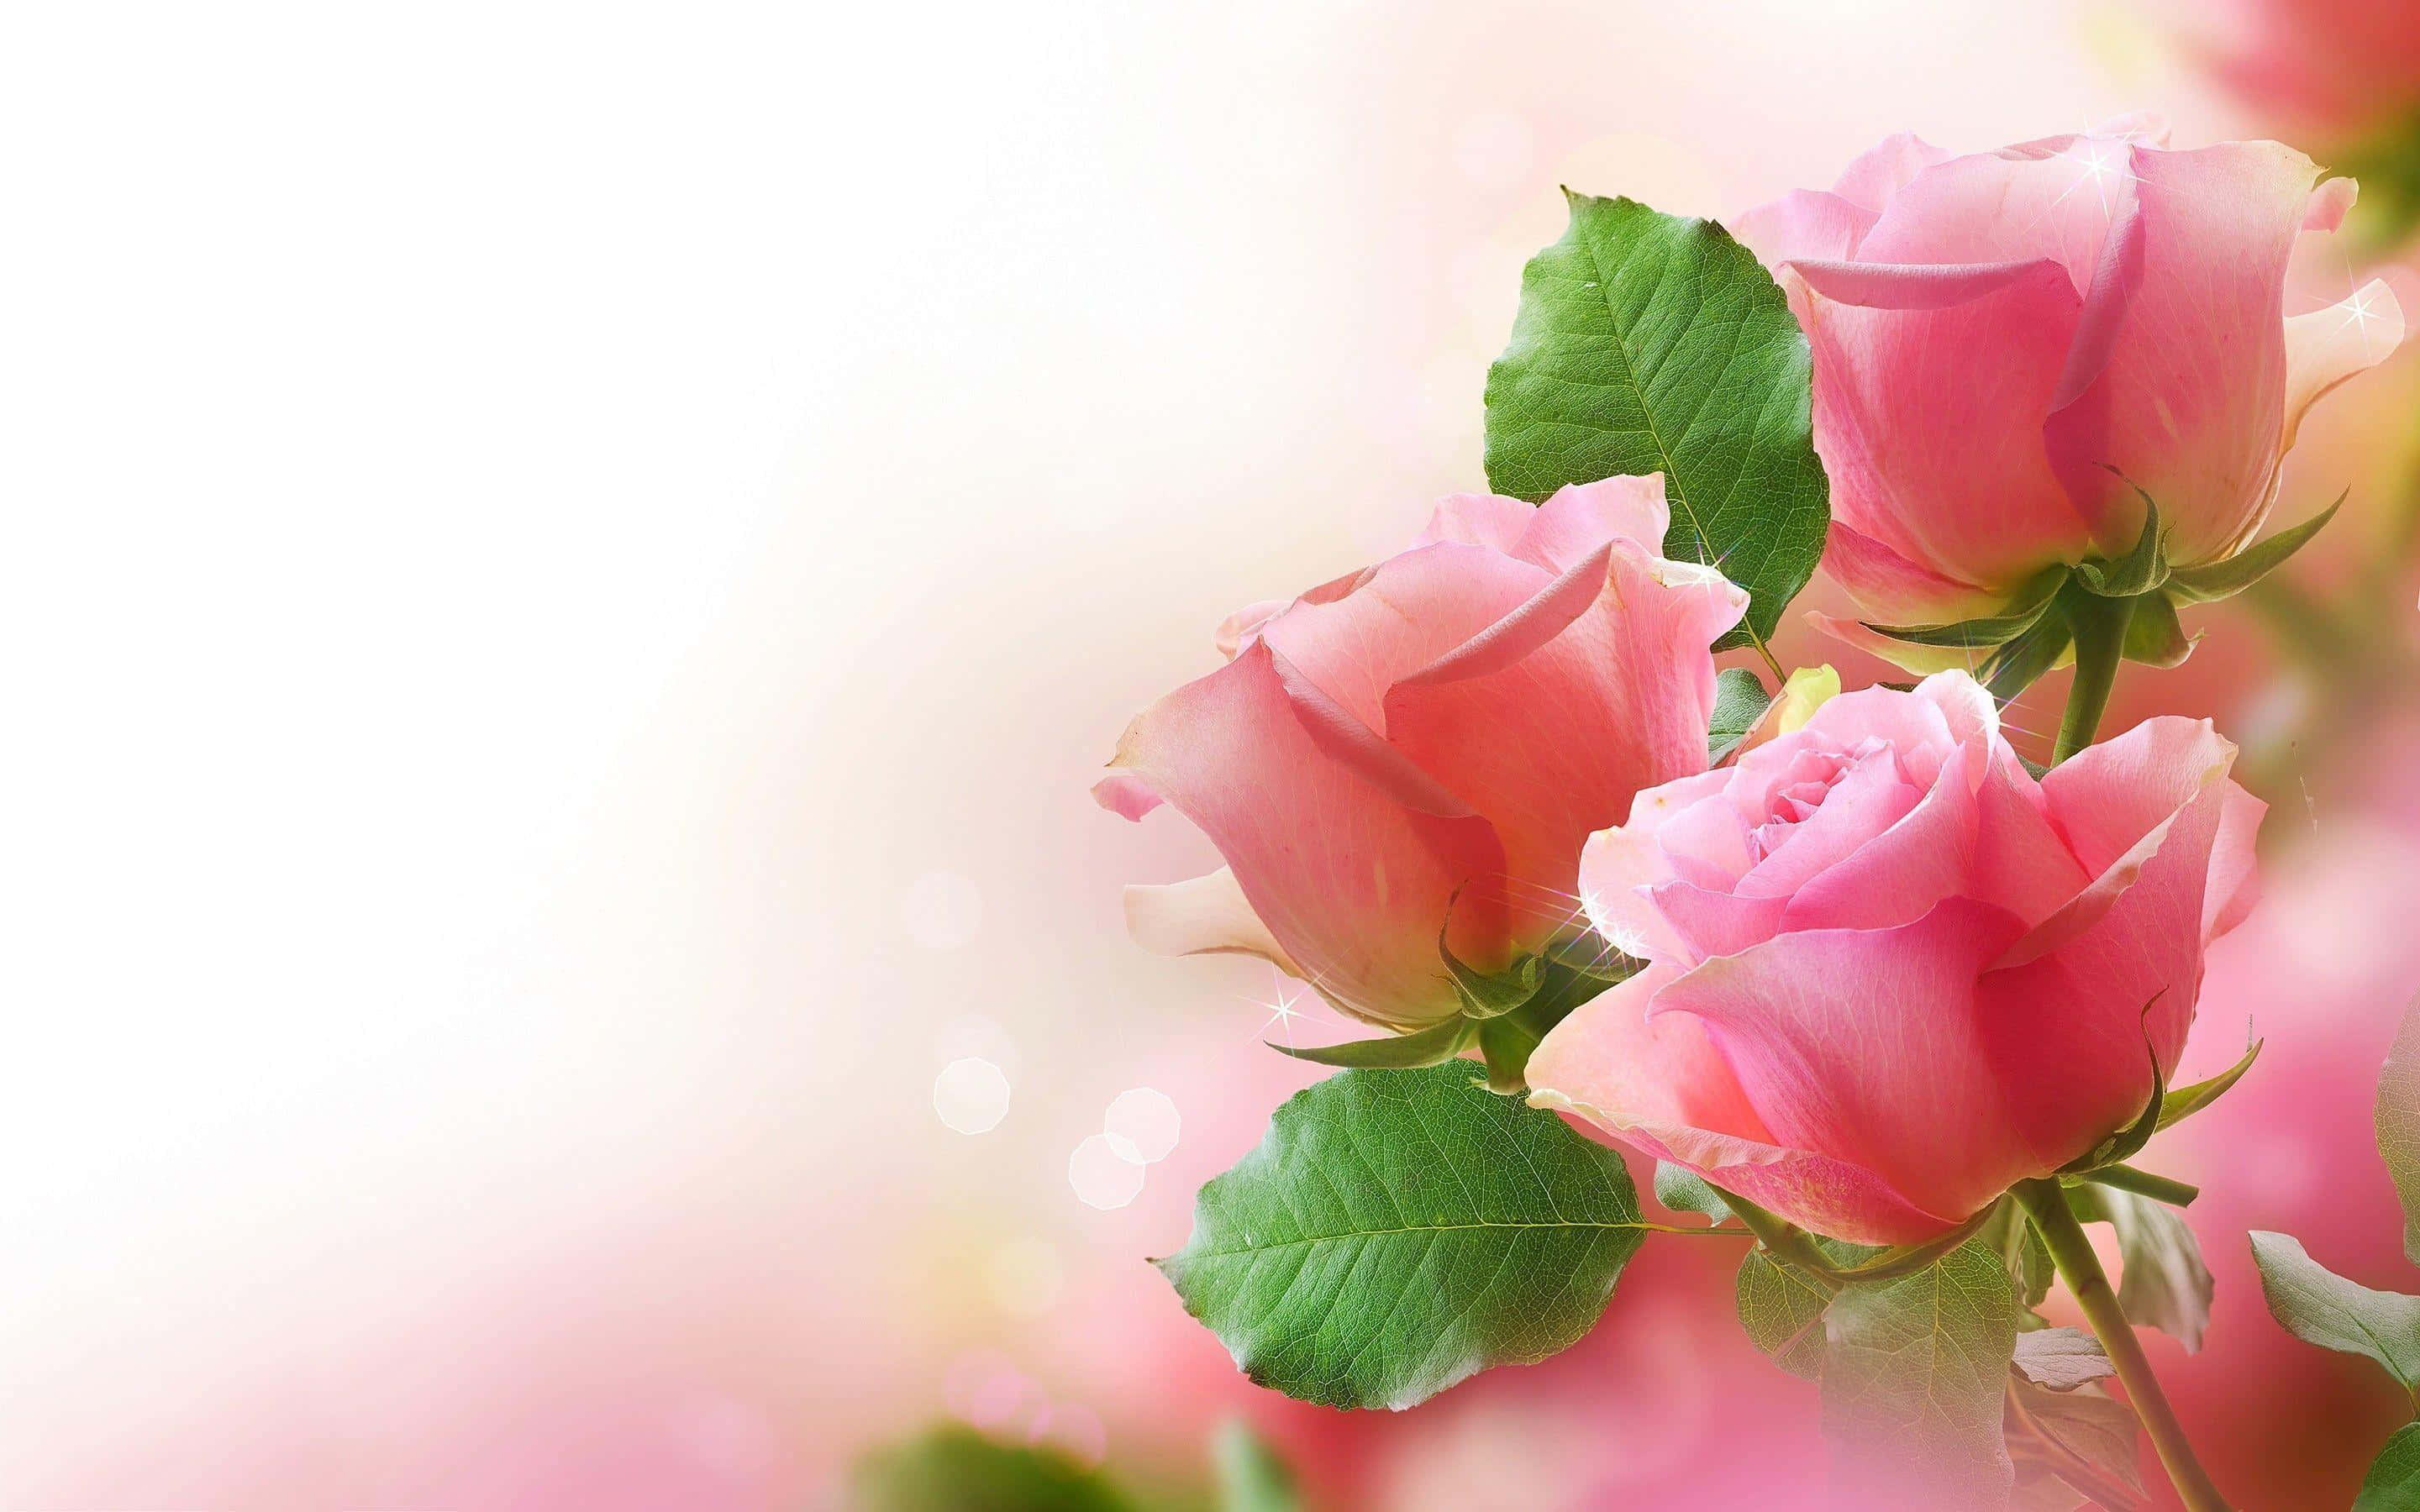 A delicate pink rose against a pale pink background